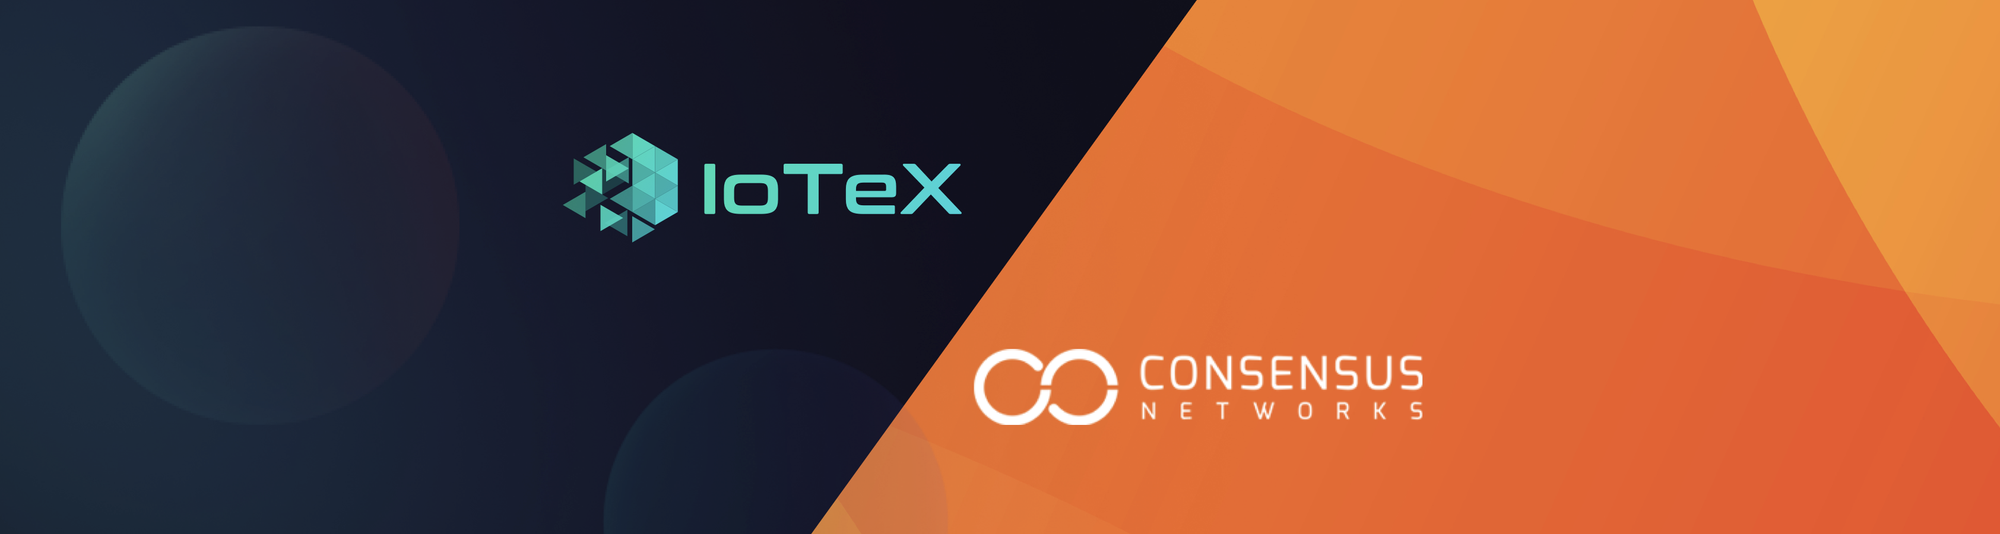 Consensus Networks Signs $1.5M Contract with US Navy for Medical Supply Chain on IoTeX